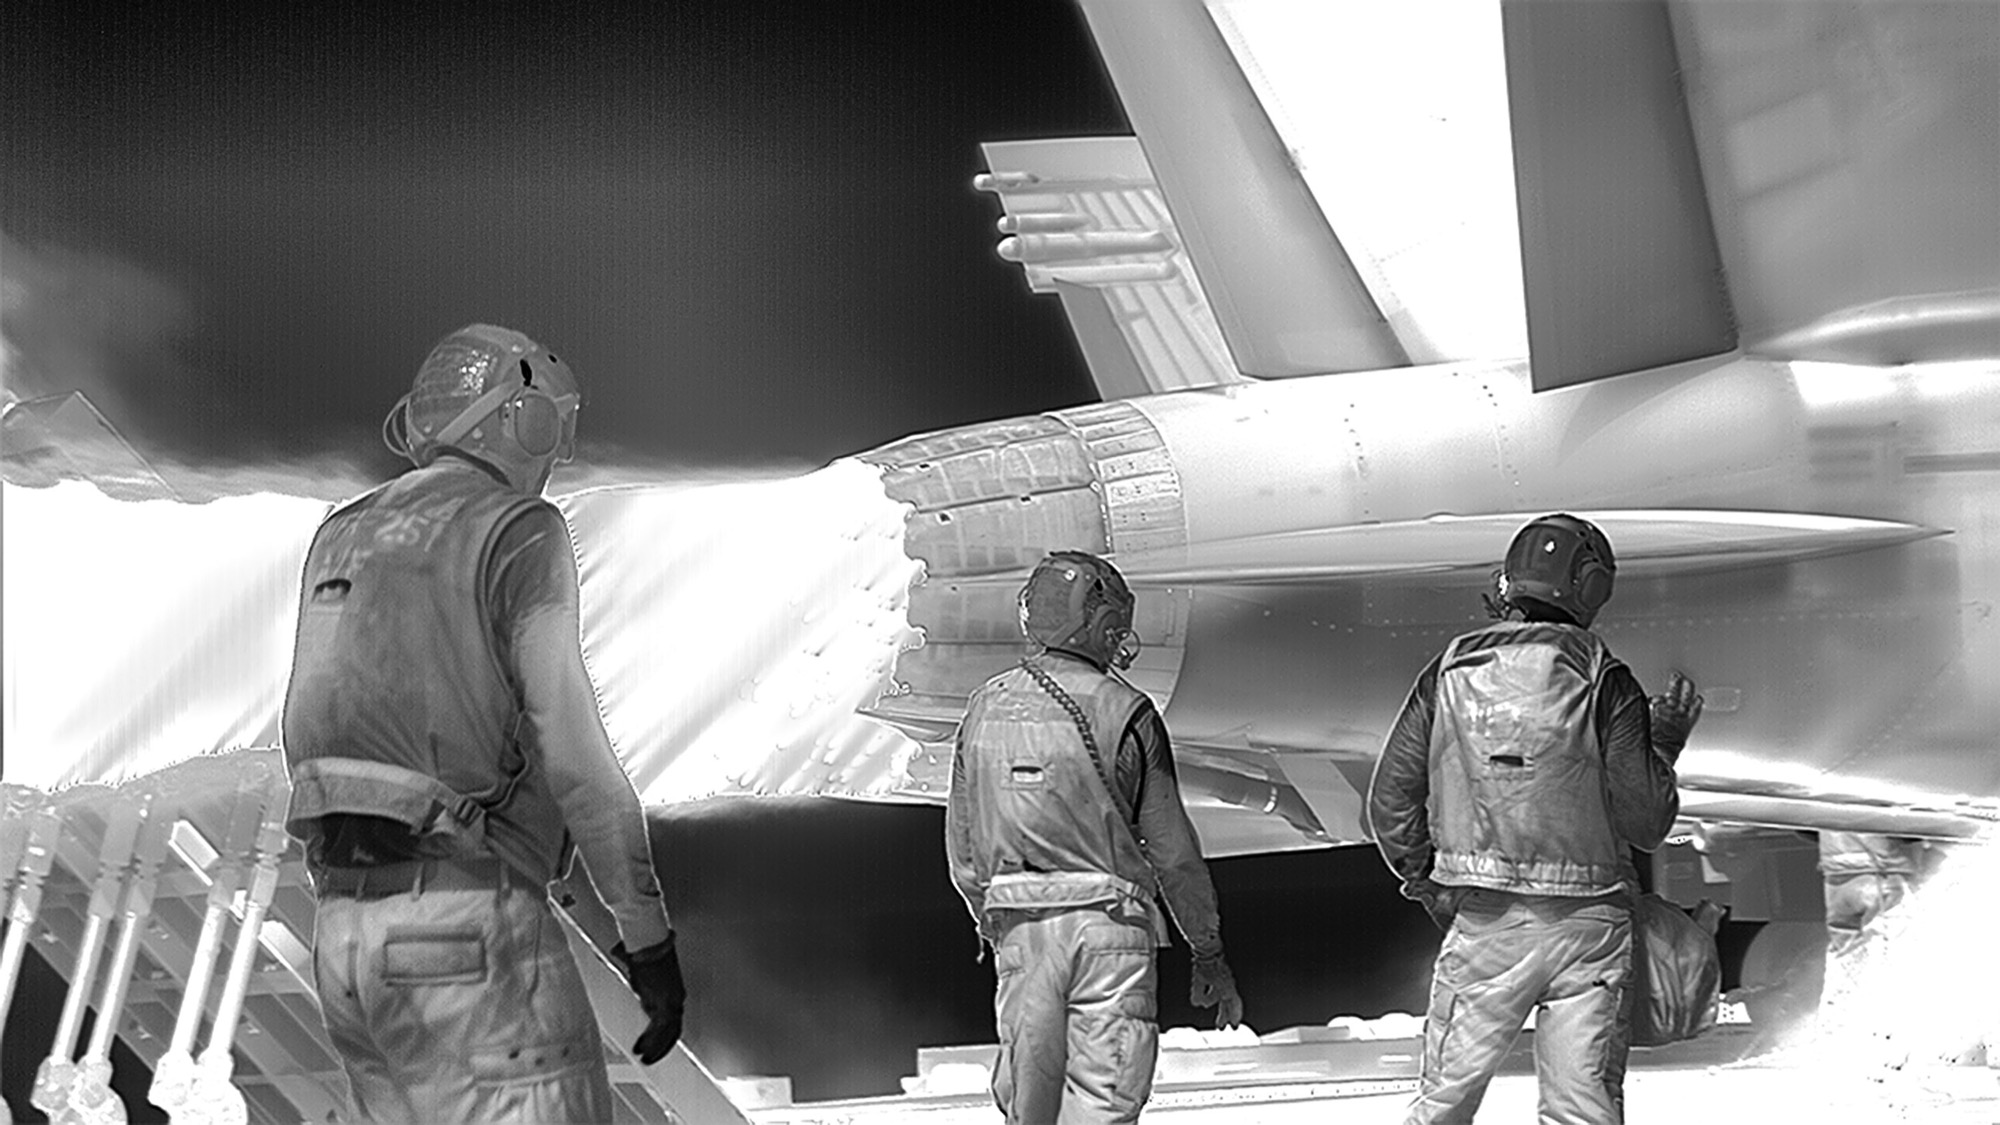 Richard Mosse, <em>Incoming</em>, (2015–16), three channel black and white high definition video, surround sound, 52 min 10 sec (looped). Cinematographer / Editor: Trevor Tweeten, Composer / Sound Designer: Ben Frost. Co-commissioned by the National Gallery of Victoria, Melbourne and the Barbican Art Gallery, London. National Gallery of Victoria, Melbourne. Purchased with funds donated by Christopher Thomas AM and Cheryl Thomas, Jane and Stephen Hains, Vivien and Graham Knowles, Michael and Emily Tong and 2016 NGV Curatorial Tour donors, 2017. © Richard Mosse Image courtesy Richard Mosse, Jack Shainman Gallery, New York and carlier|gebauer, Berlin.